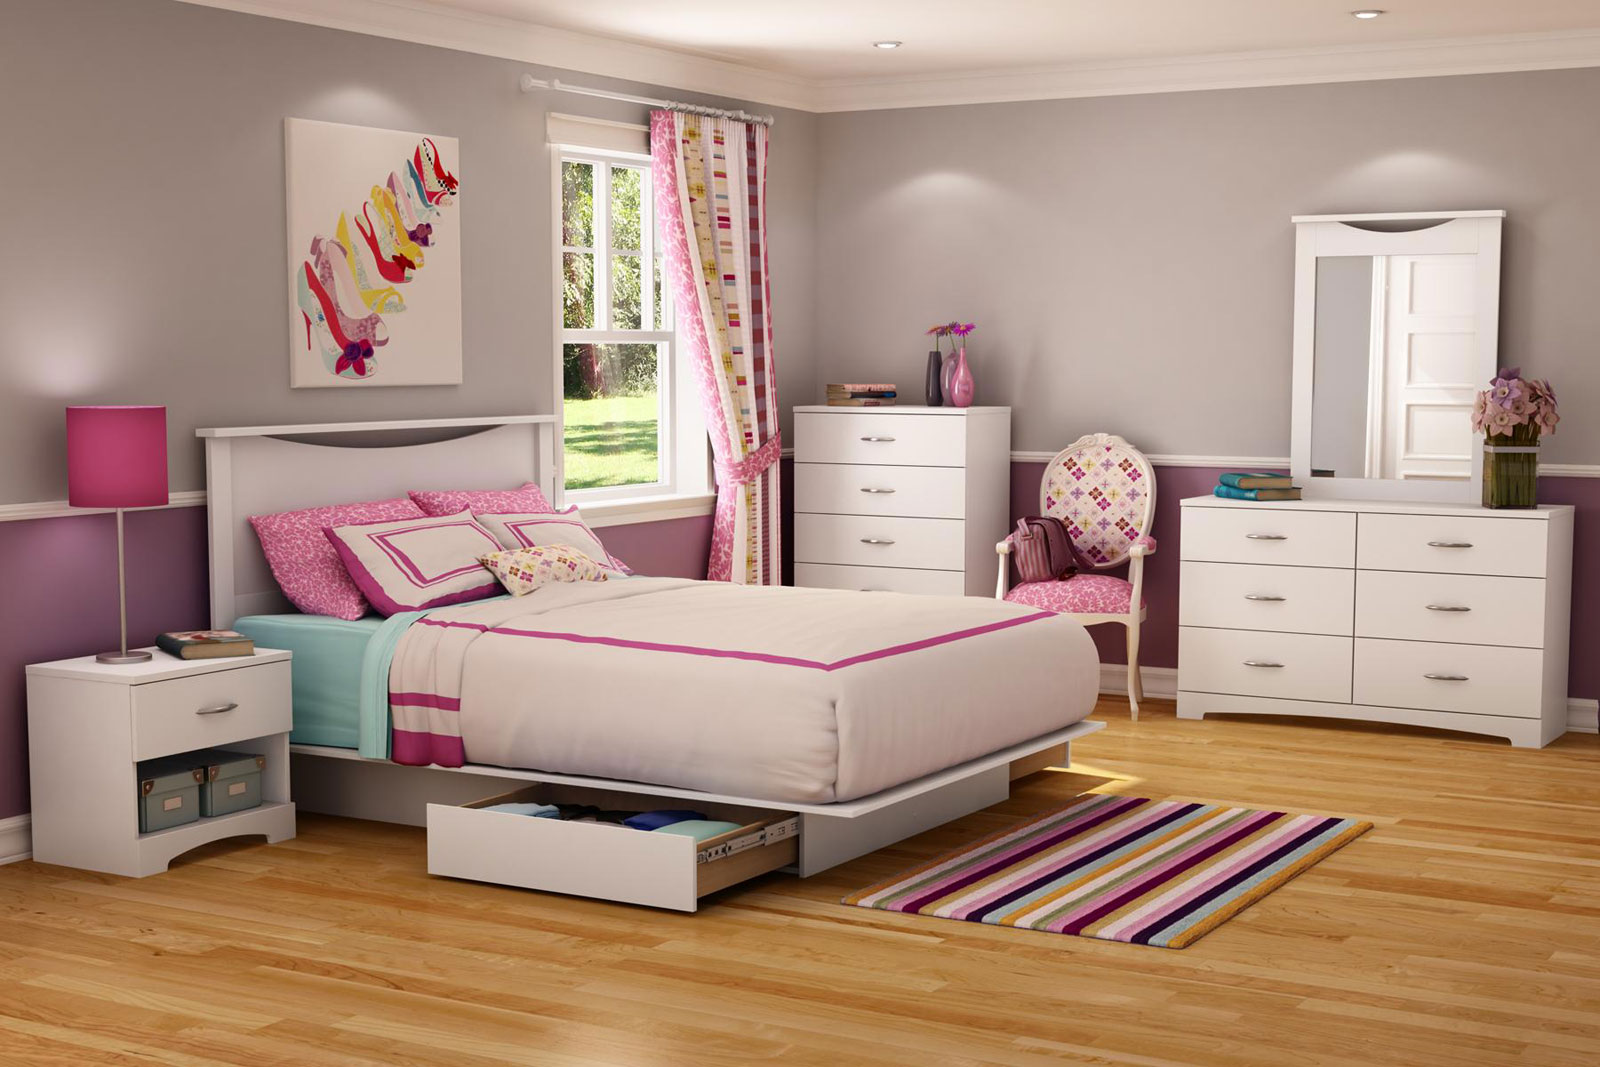 Pink Bedroom Completed Amusing Pink Bedroom Color Ideas Completed By Queen Bedroom Sets With Platform Drawers And Night Lamp On Nightstand Furnished With Chair And Vanity Table Coupled With Mirror Bedroom Queen Bedroom Sets For The Modern Style